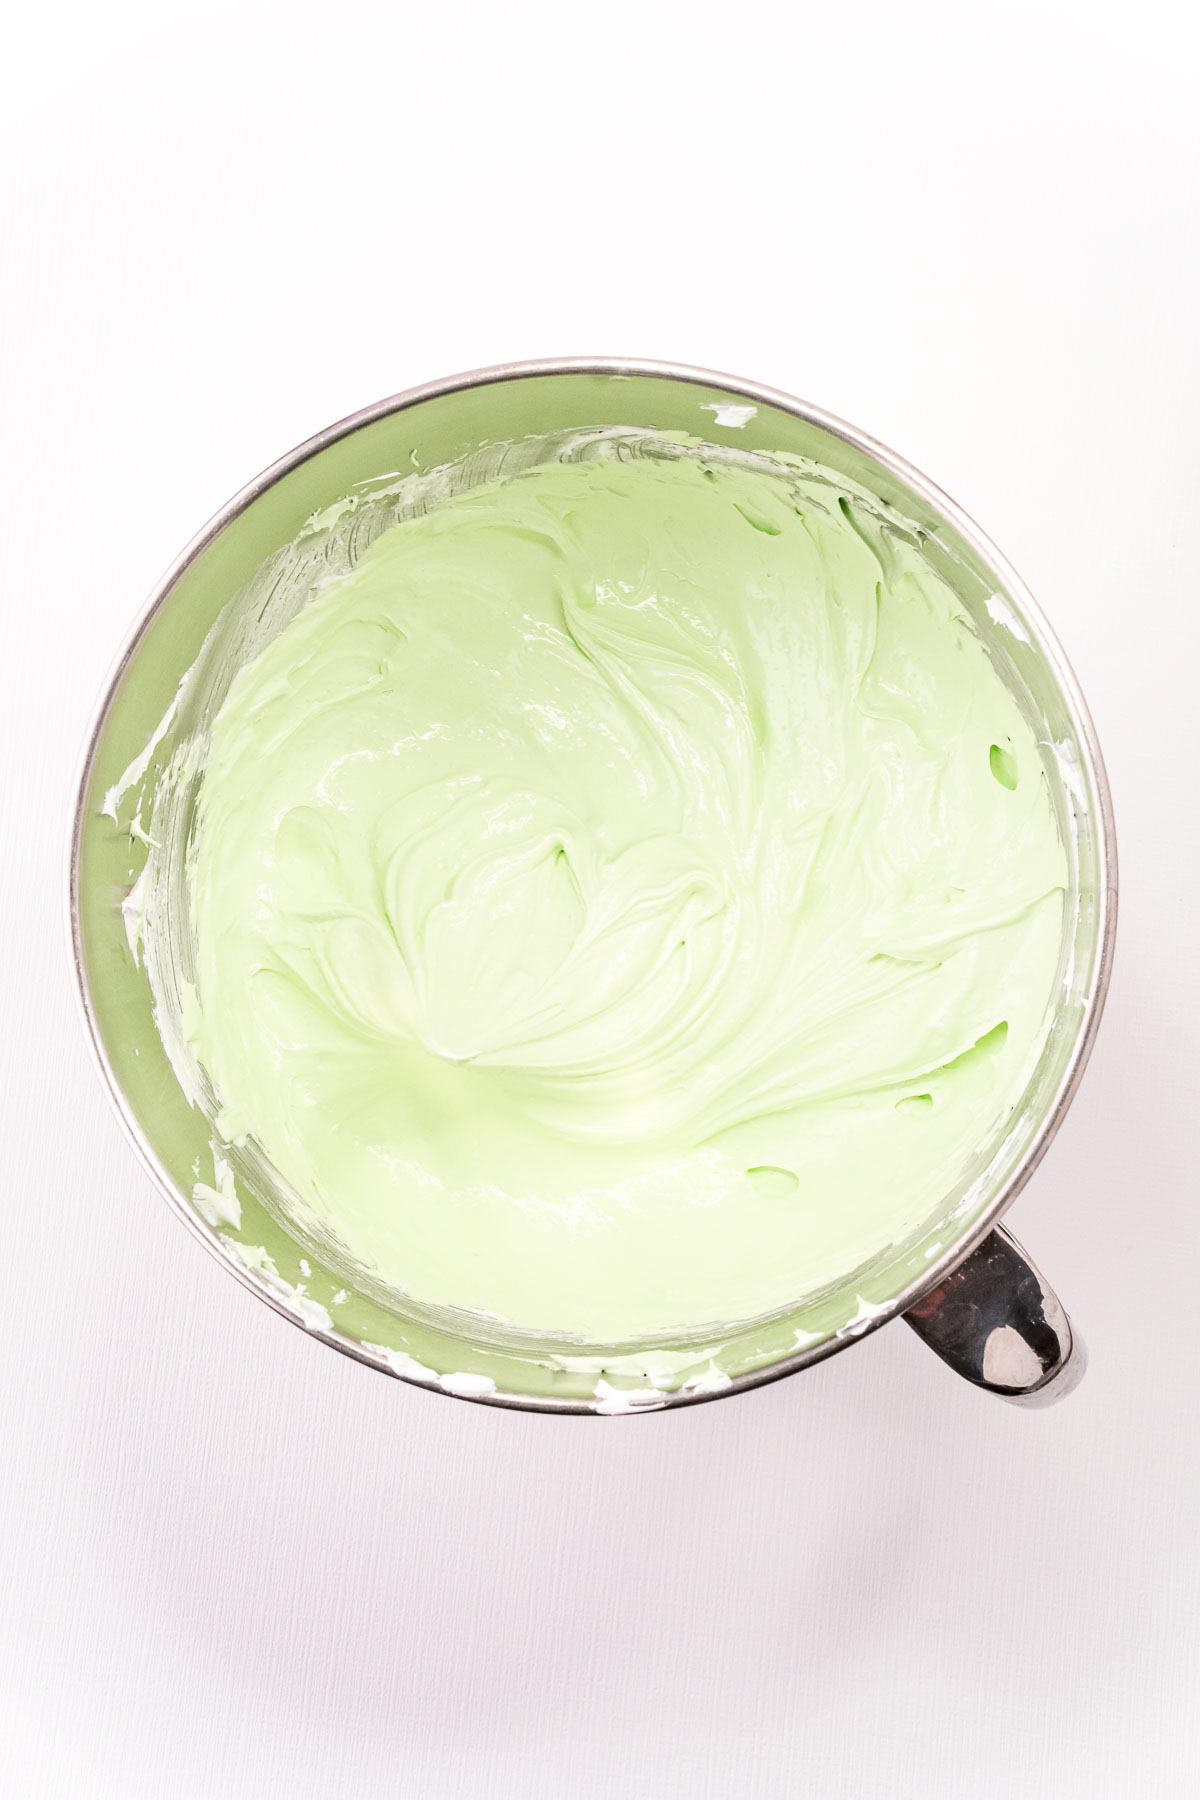 green colored meringue in a mixing bowl